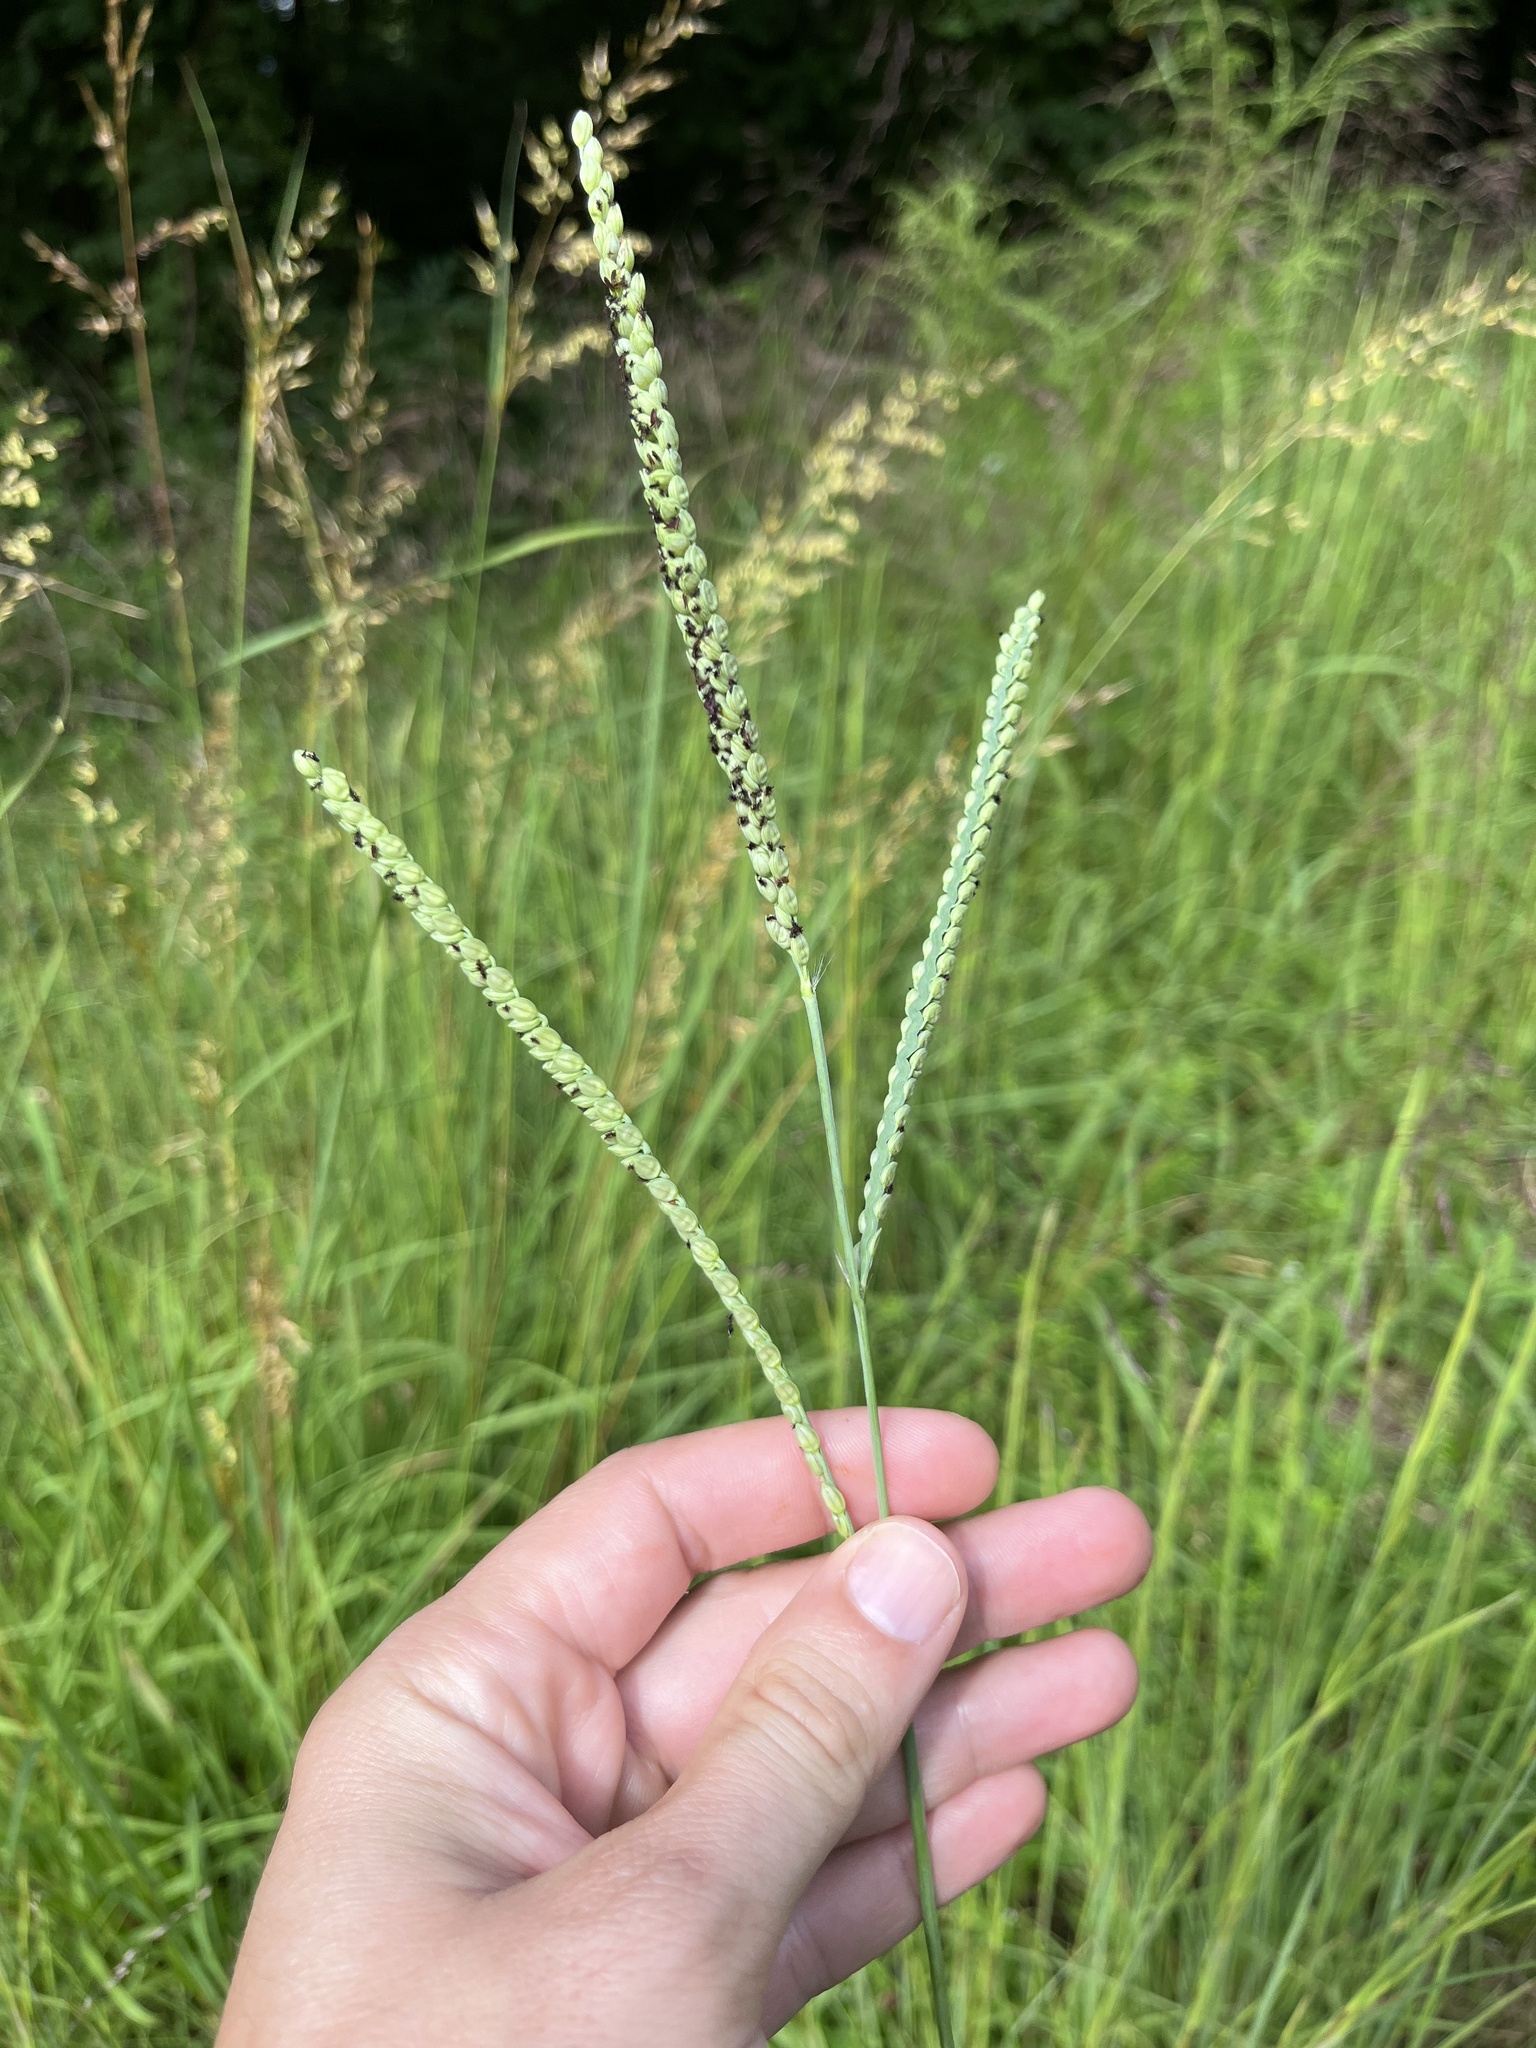 The Scientific Name is Paspalum floridanum. You will likely hear them called Florida Paspalum, Crowngrass. This picture shows the Spikelets are in neat rows along each side of the rachis. of Paspalum floridanum